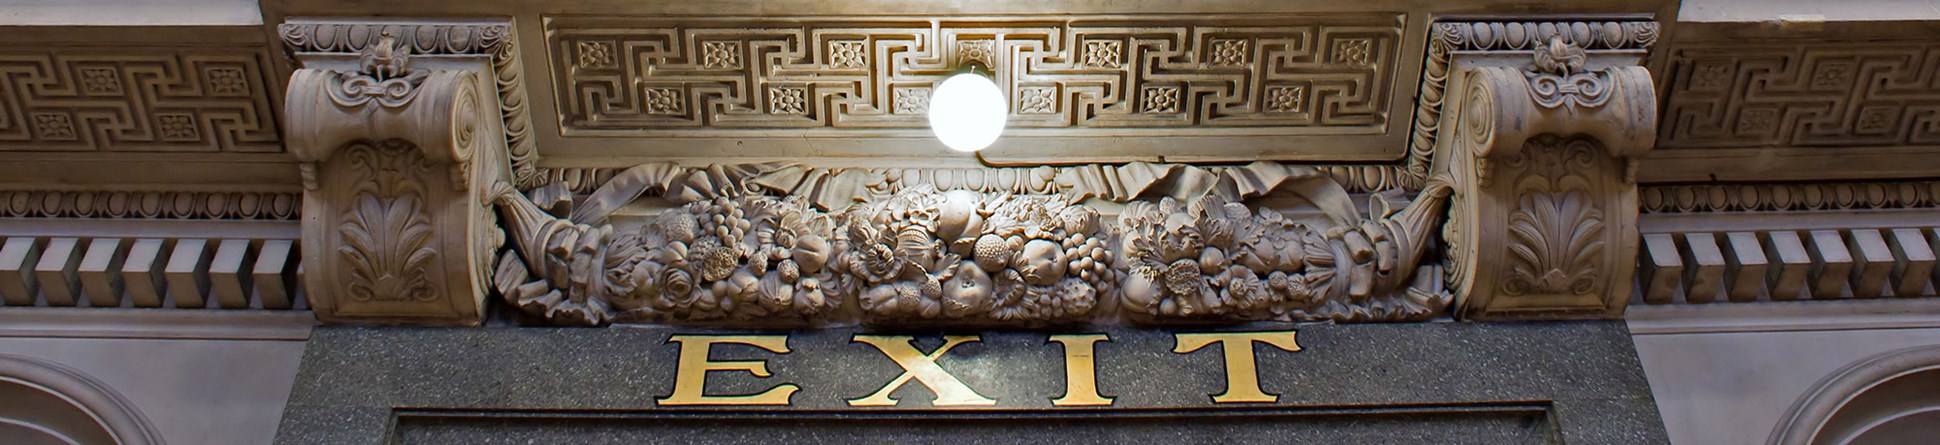 EXIT sign in gold letters above a doorway